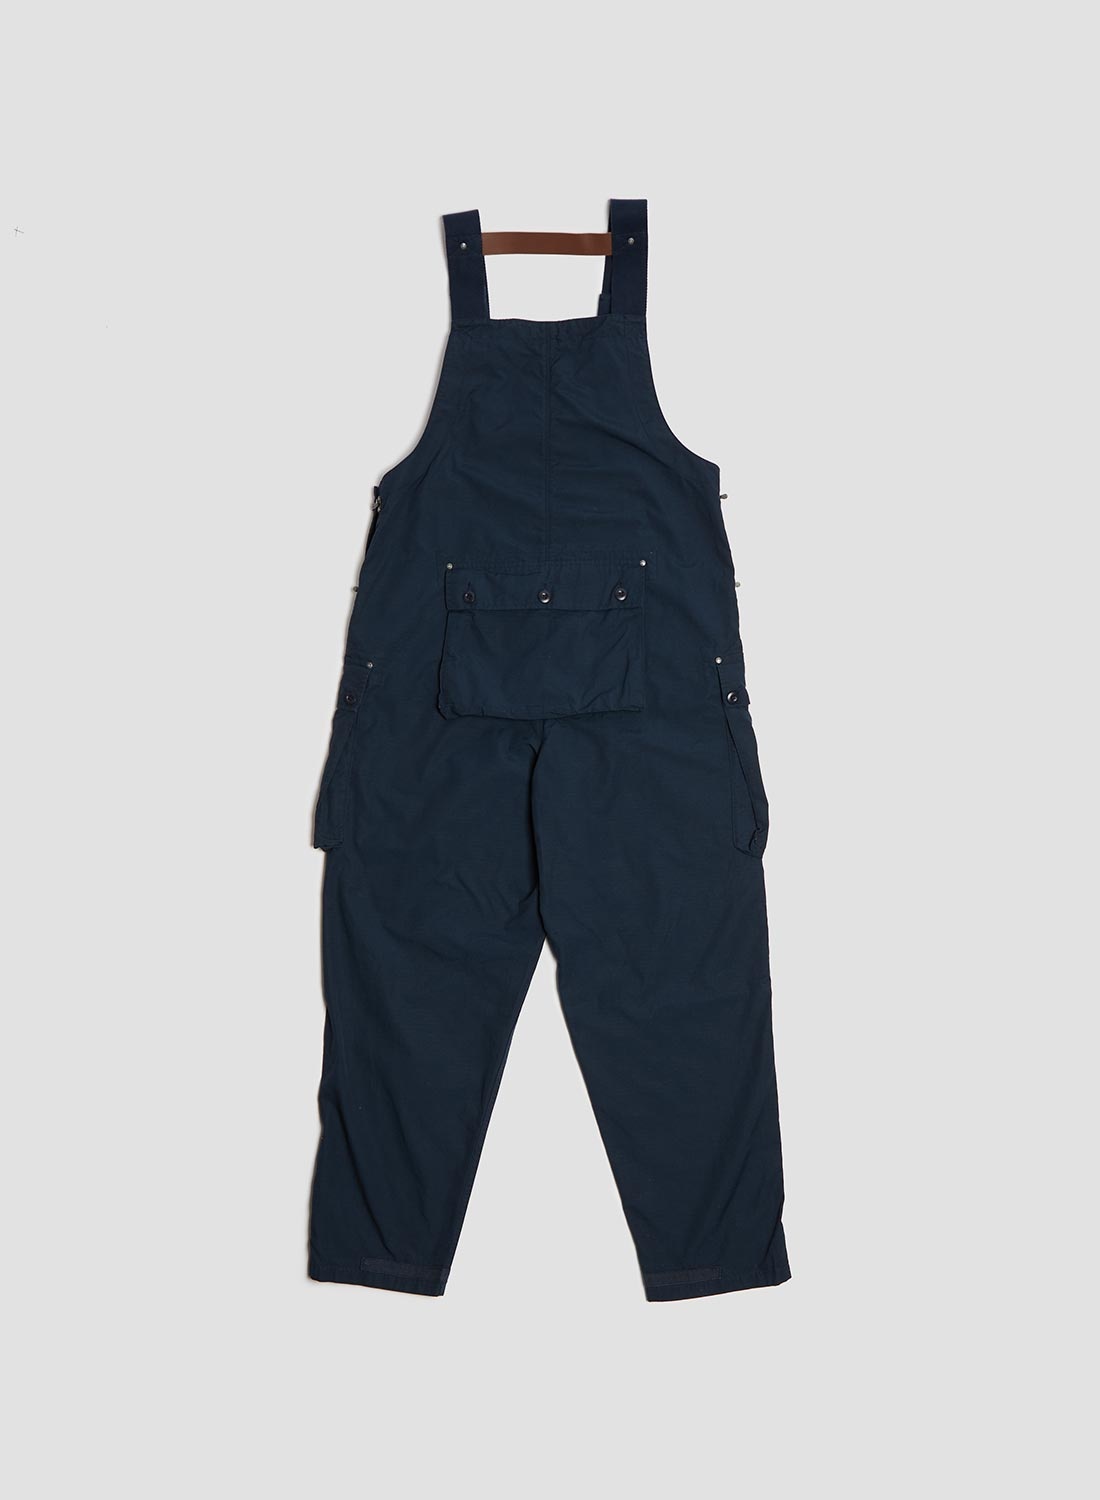 Naval Dungaree in Black Navy (Cotton Ripstop) - 5